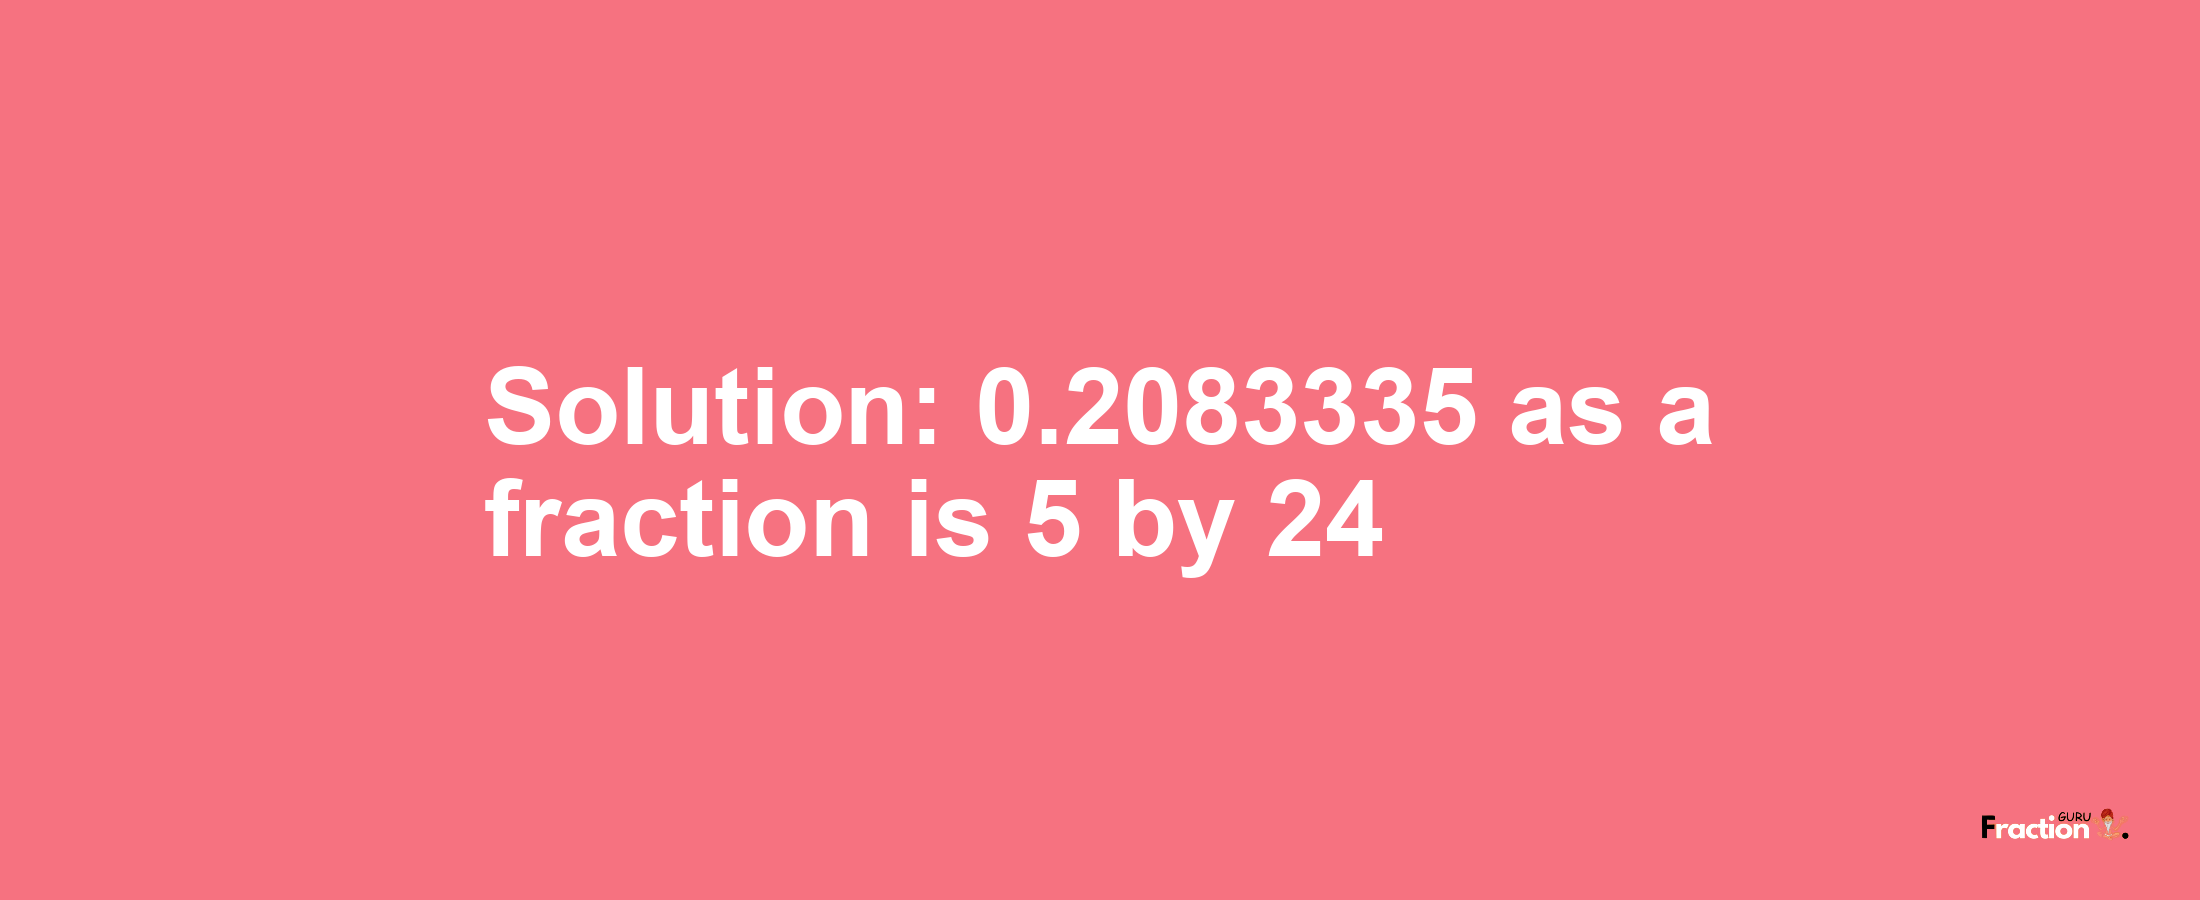 Solution:0.2083335 as a fraction is 5/24